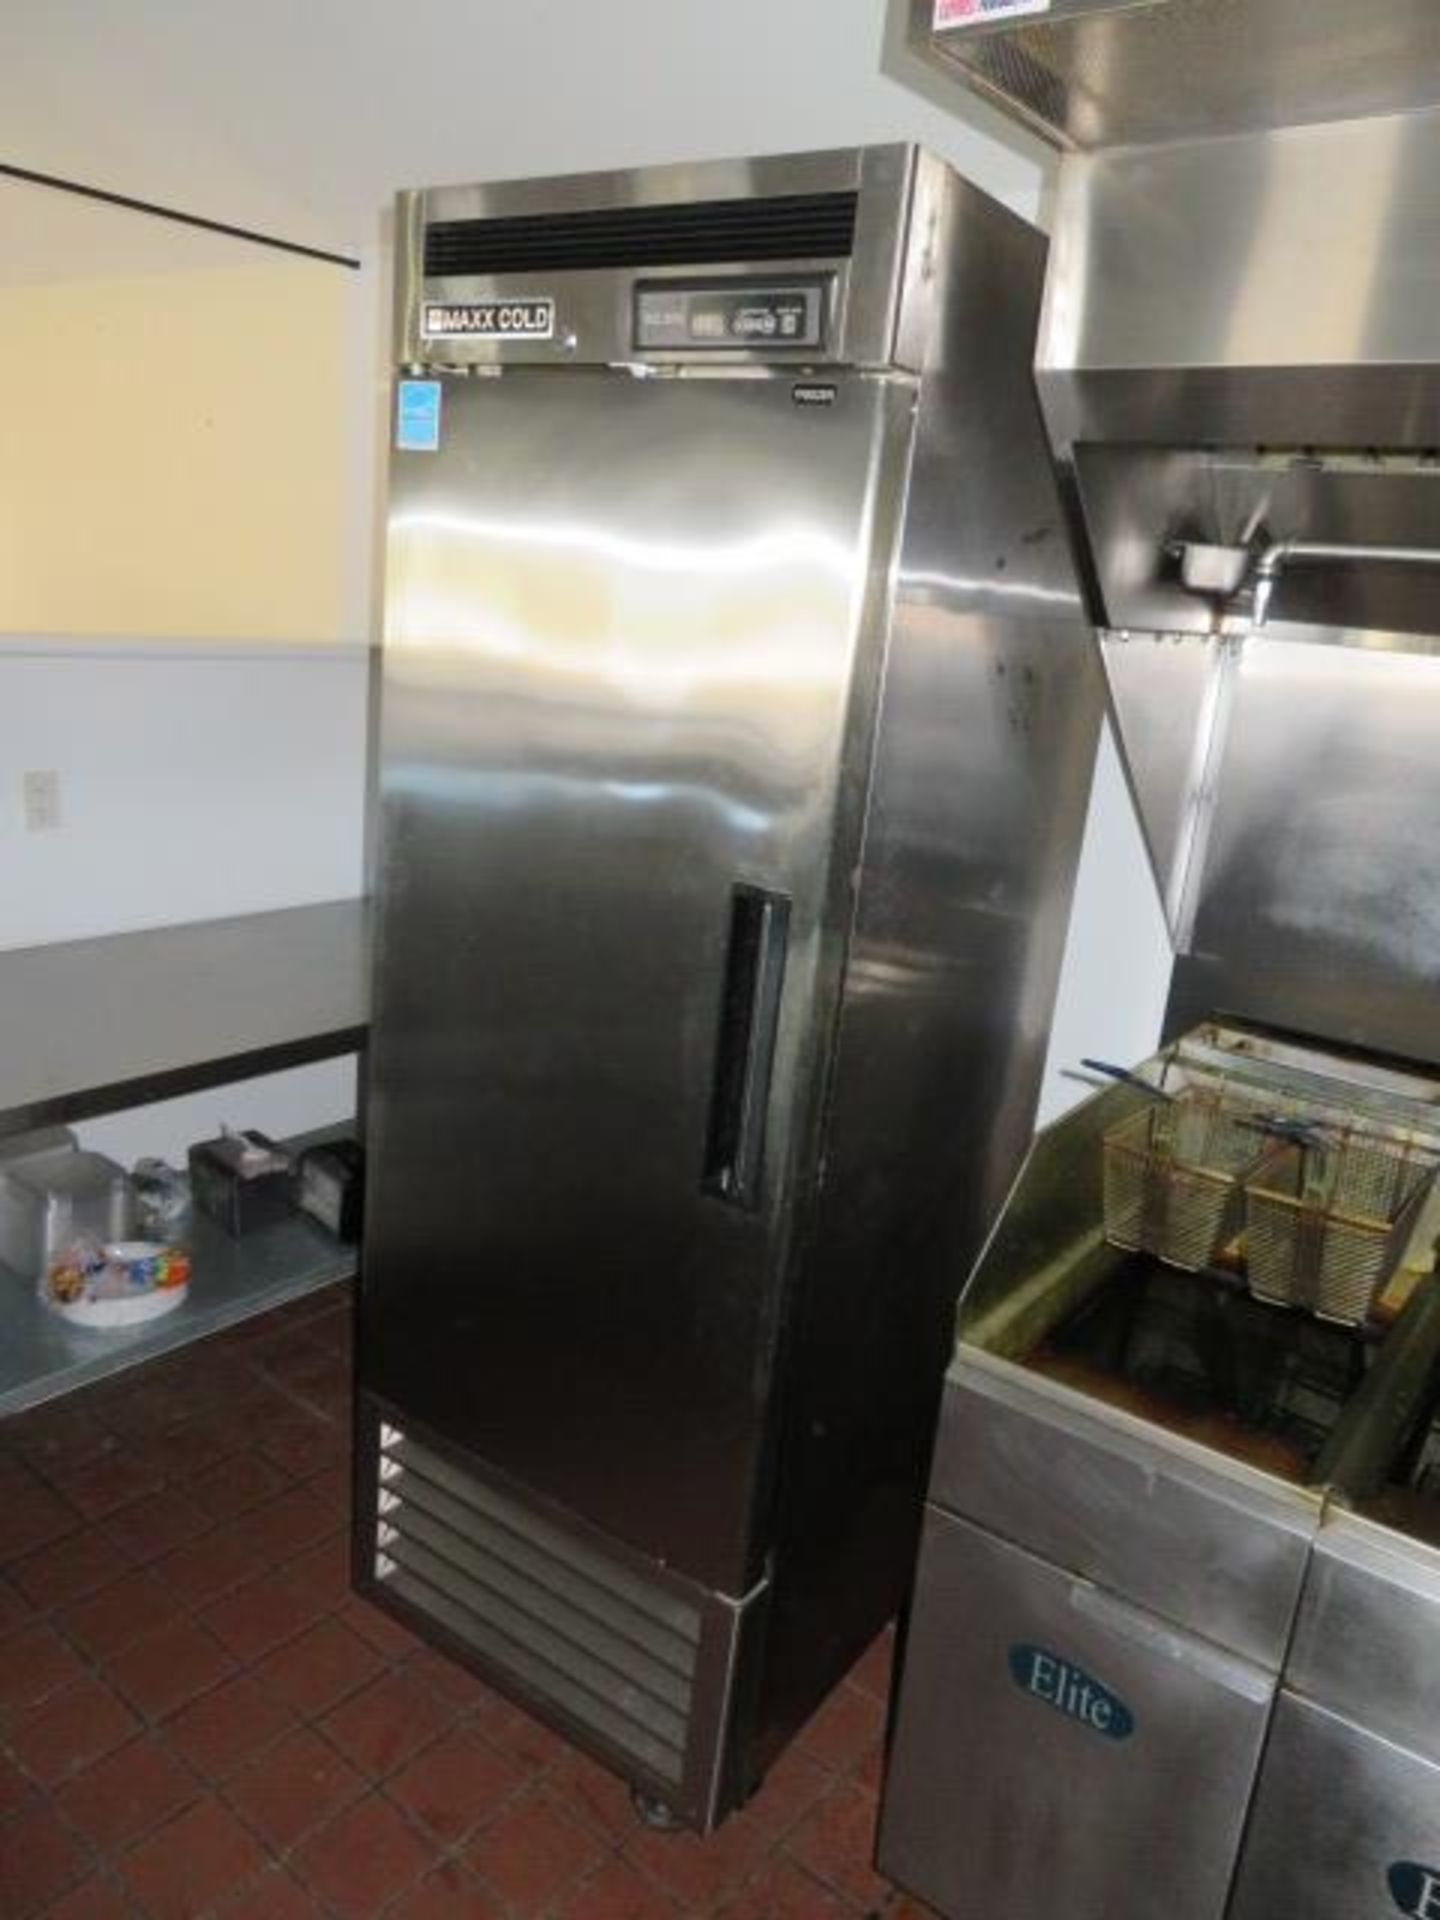 COLD MAXX FREEZER, MDL. MCF-23FD, DRO, CASTERS (Located - Mays Landing, NJ) - Image 2 of 7